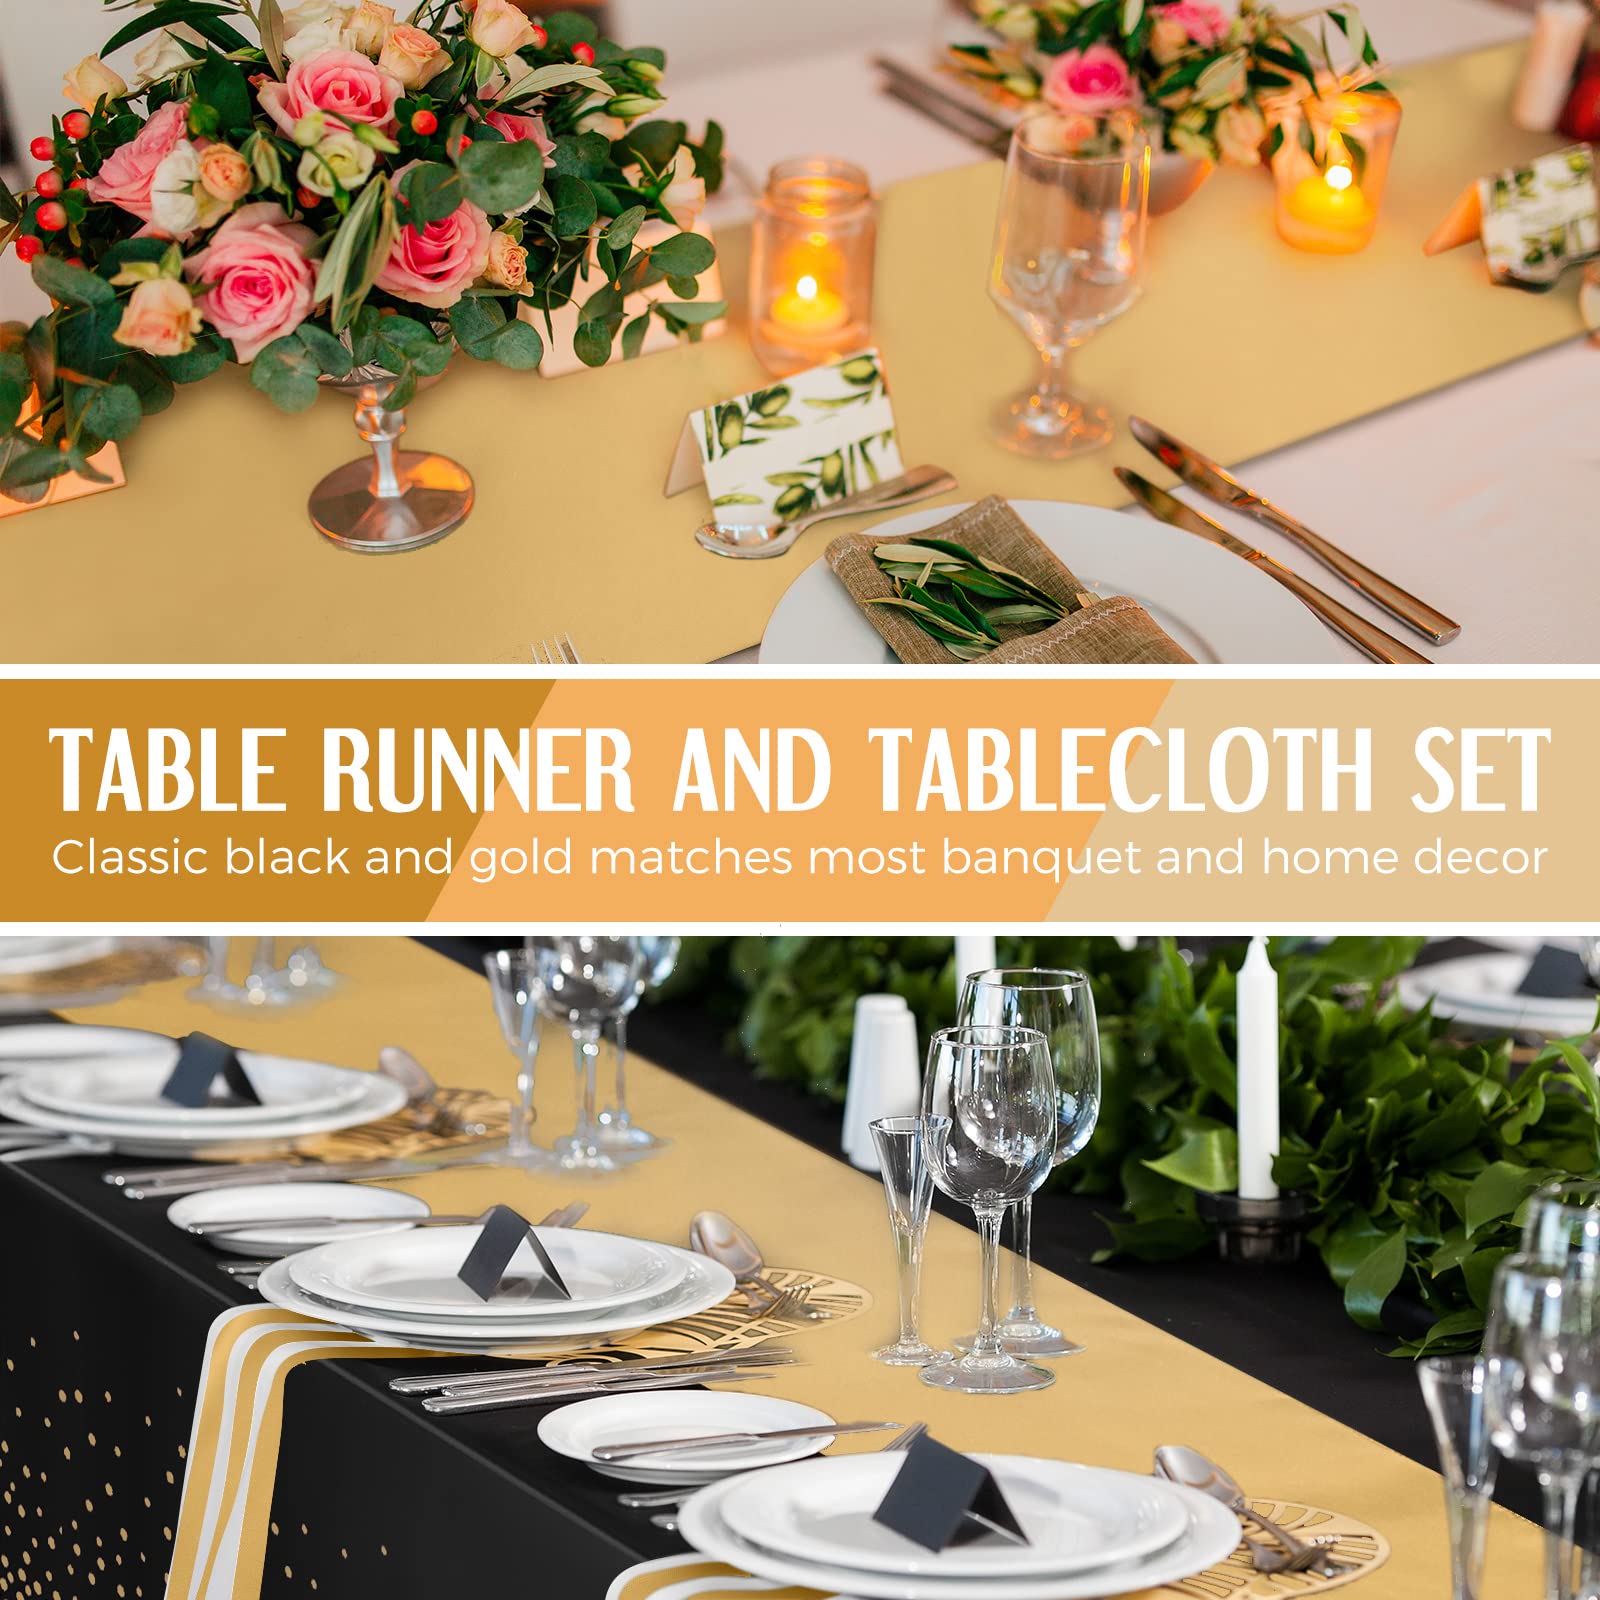 Tablecloth and table runner set